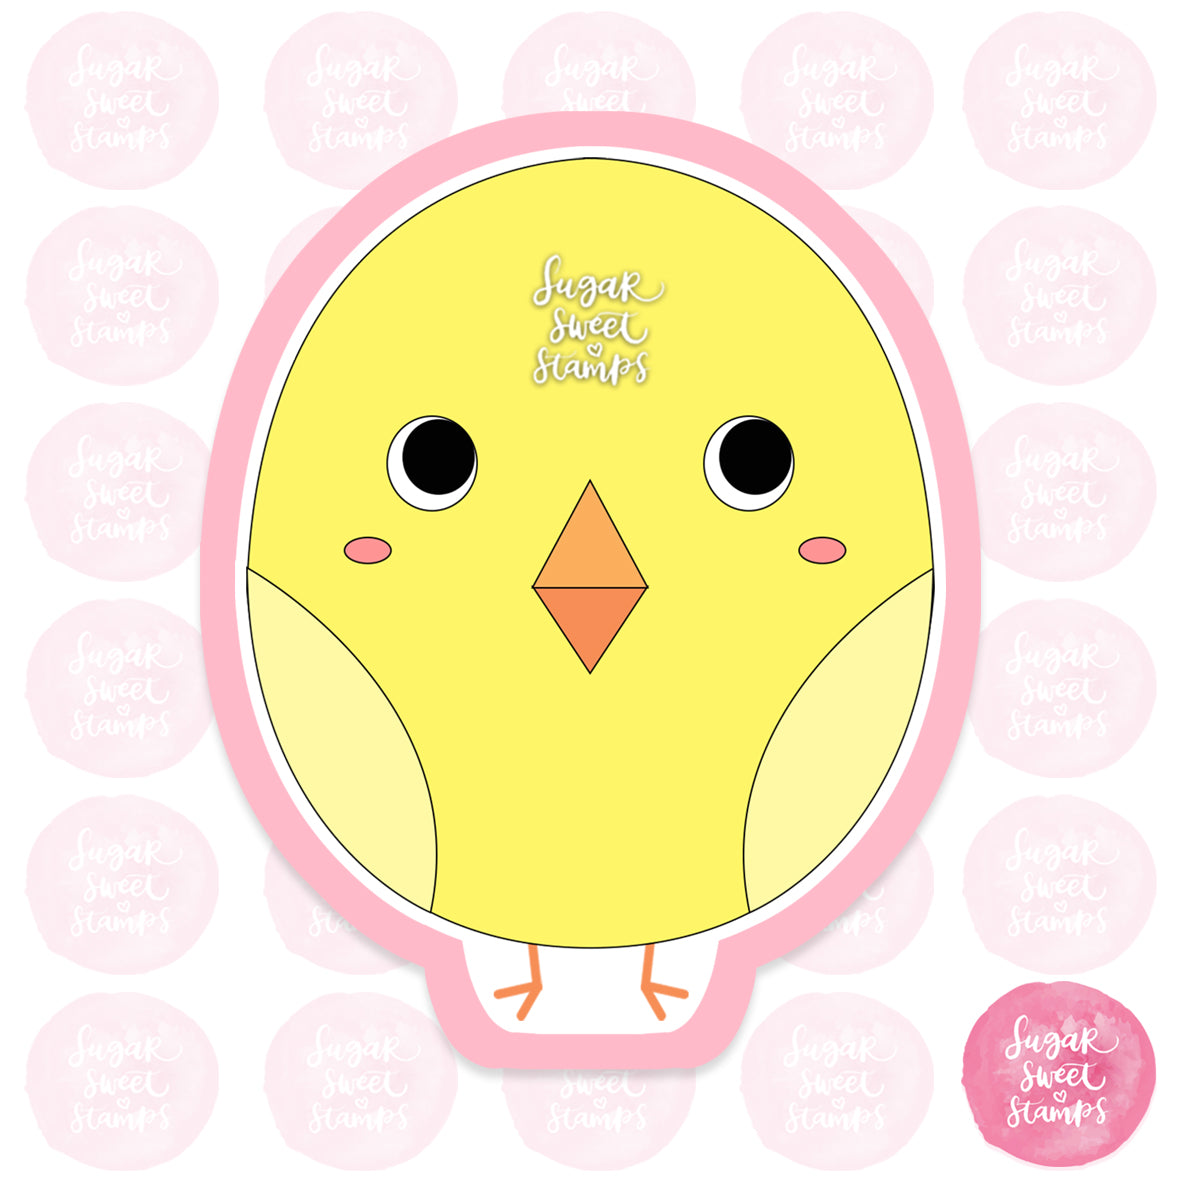 Custom Baby Chick Cookie Cutter by Sugar Sweet Stamps. Make cookies shaped like cute baby chicks!